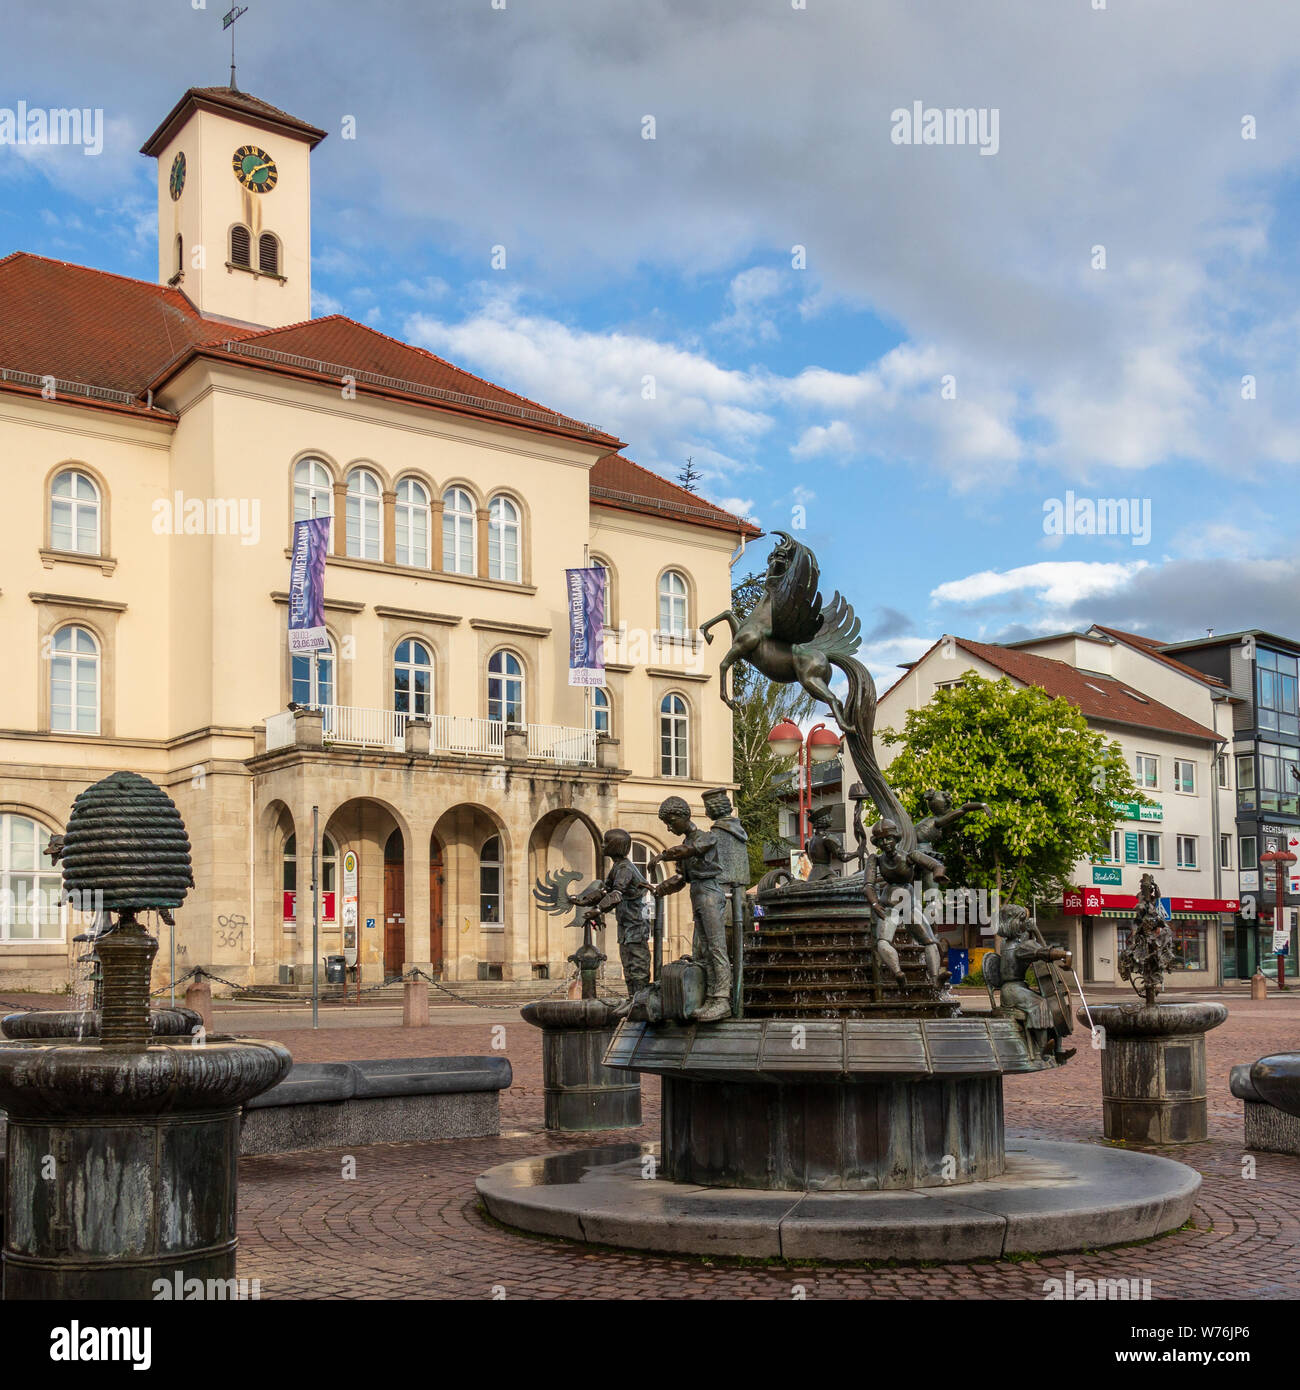 Sindelfingen, Baden Wurttemberg/Germany - May 11, 2019: City Gallery building, Stadtgalerie and market fountain. Stock Photo